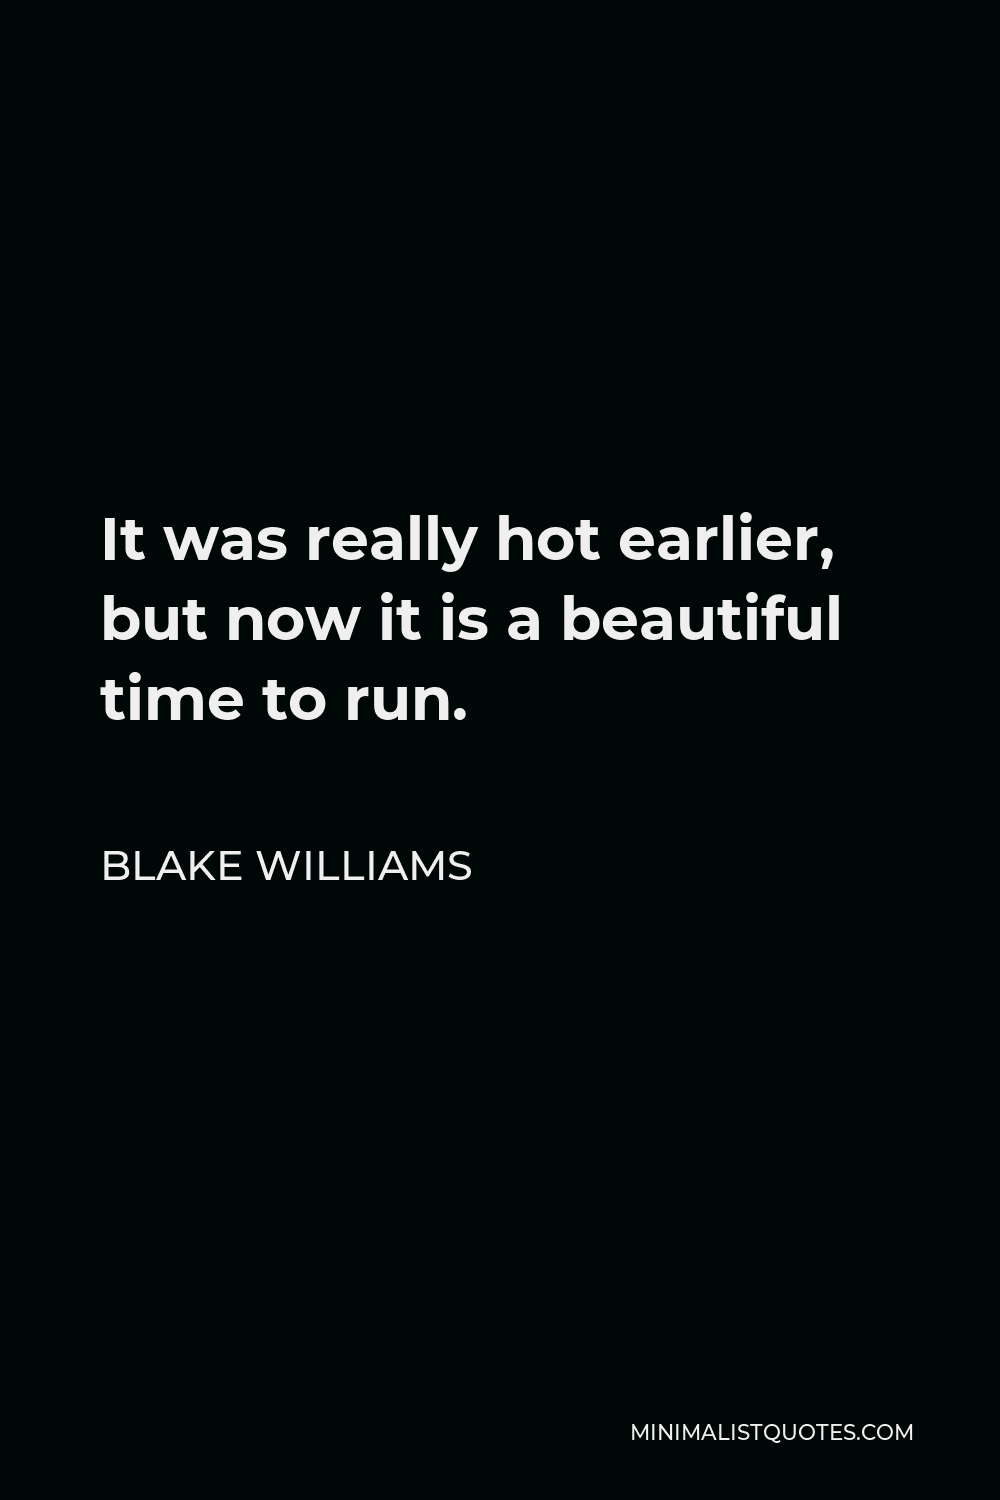 Blake Williams Quote - It was really hot earlier, but now it is a beautiful time to run.